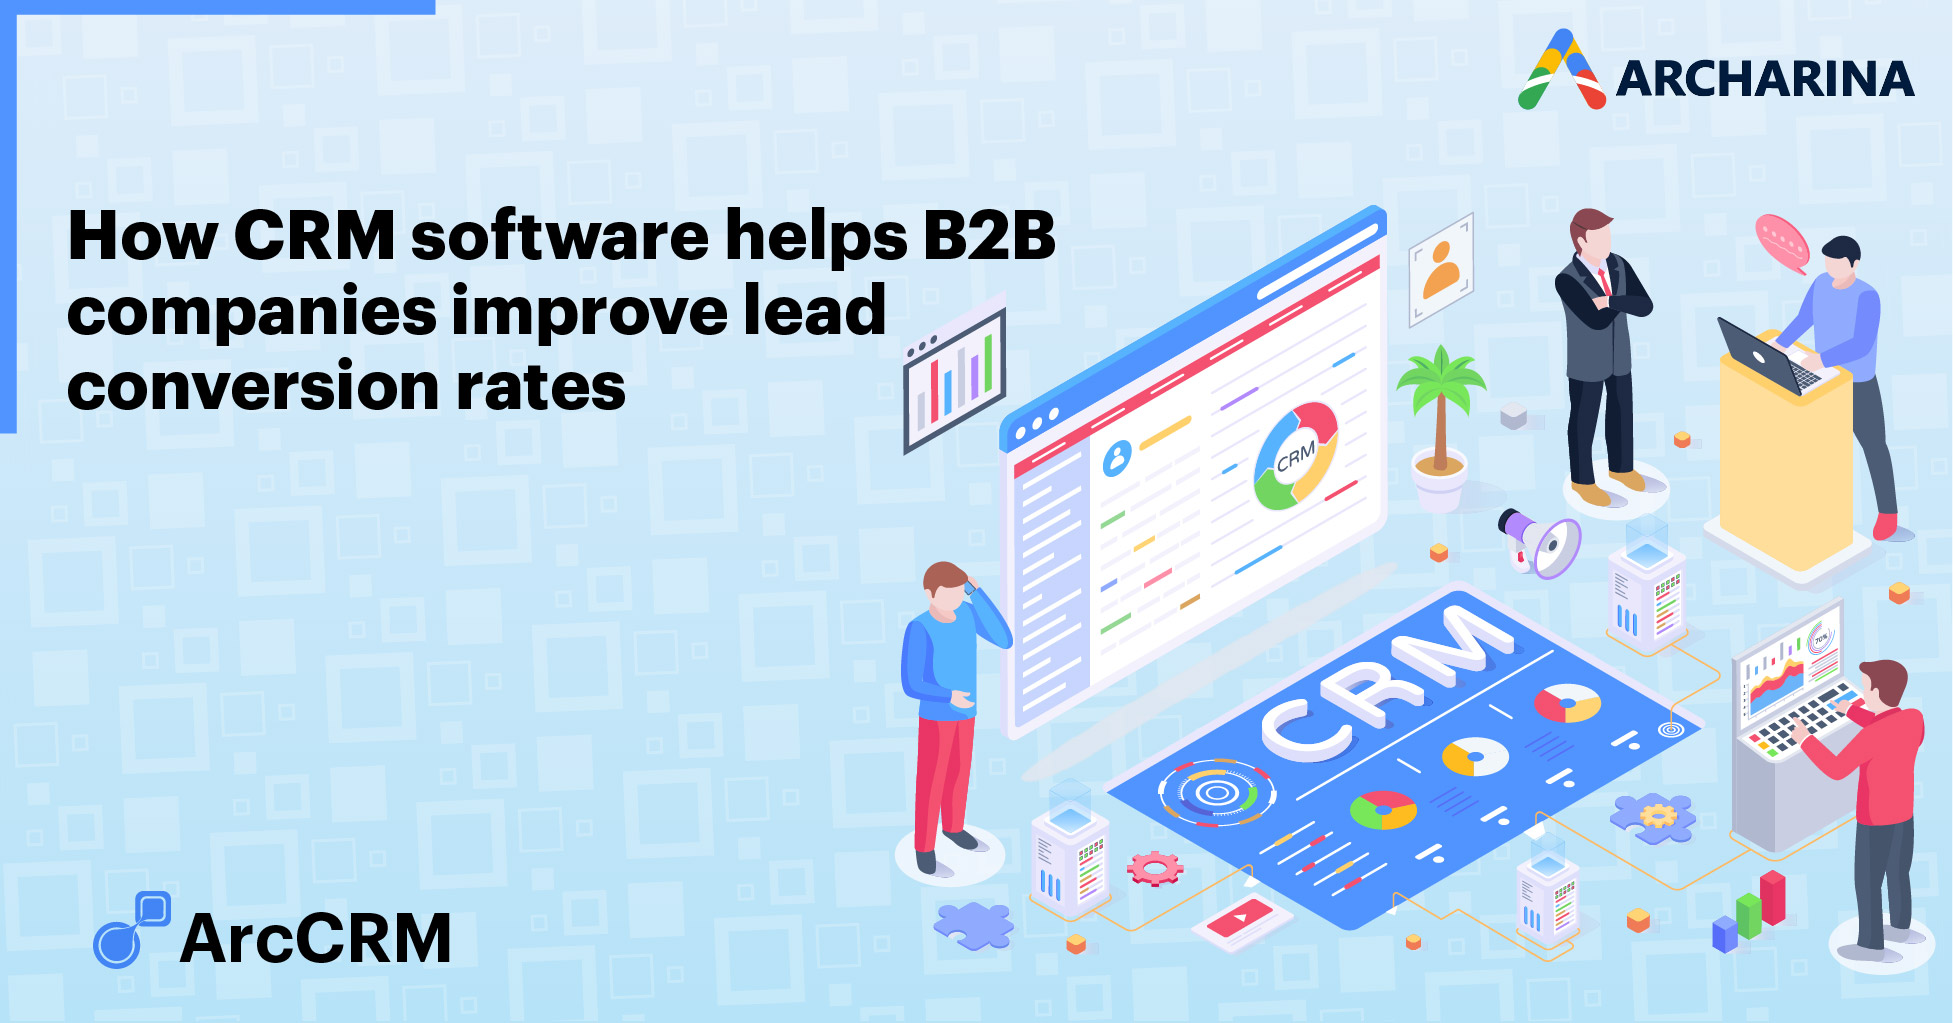 How CRM software helps B2B companies improve lead conversion rates